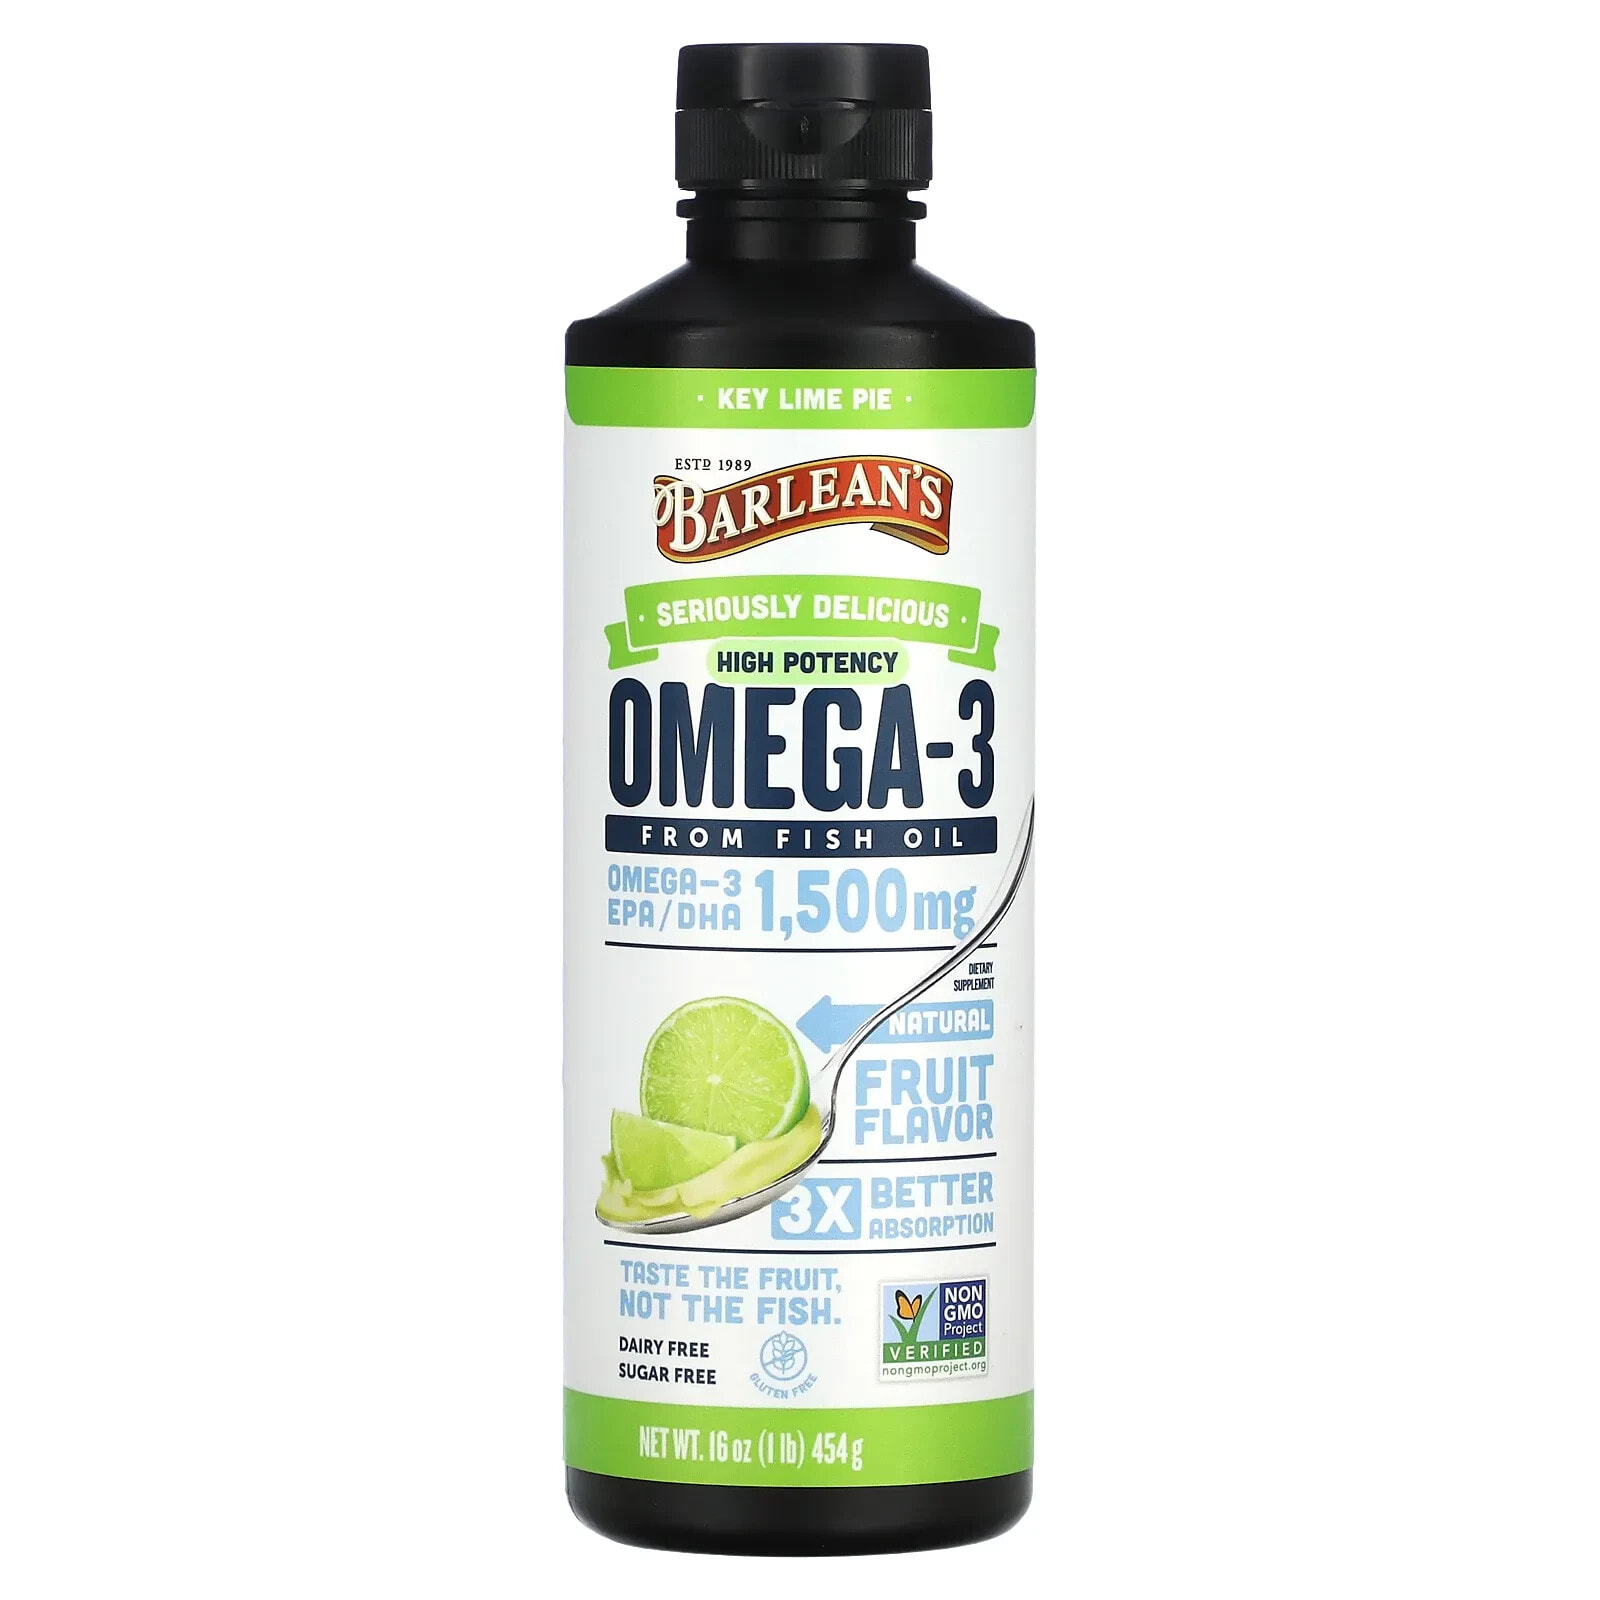 Seriously Delicious, Omega-3 Fish Oil, High Potency, Key Lime Pie, 1,500 mg, 16 oz (454 g)